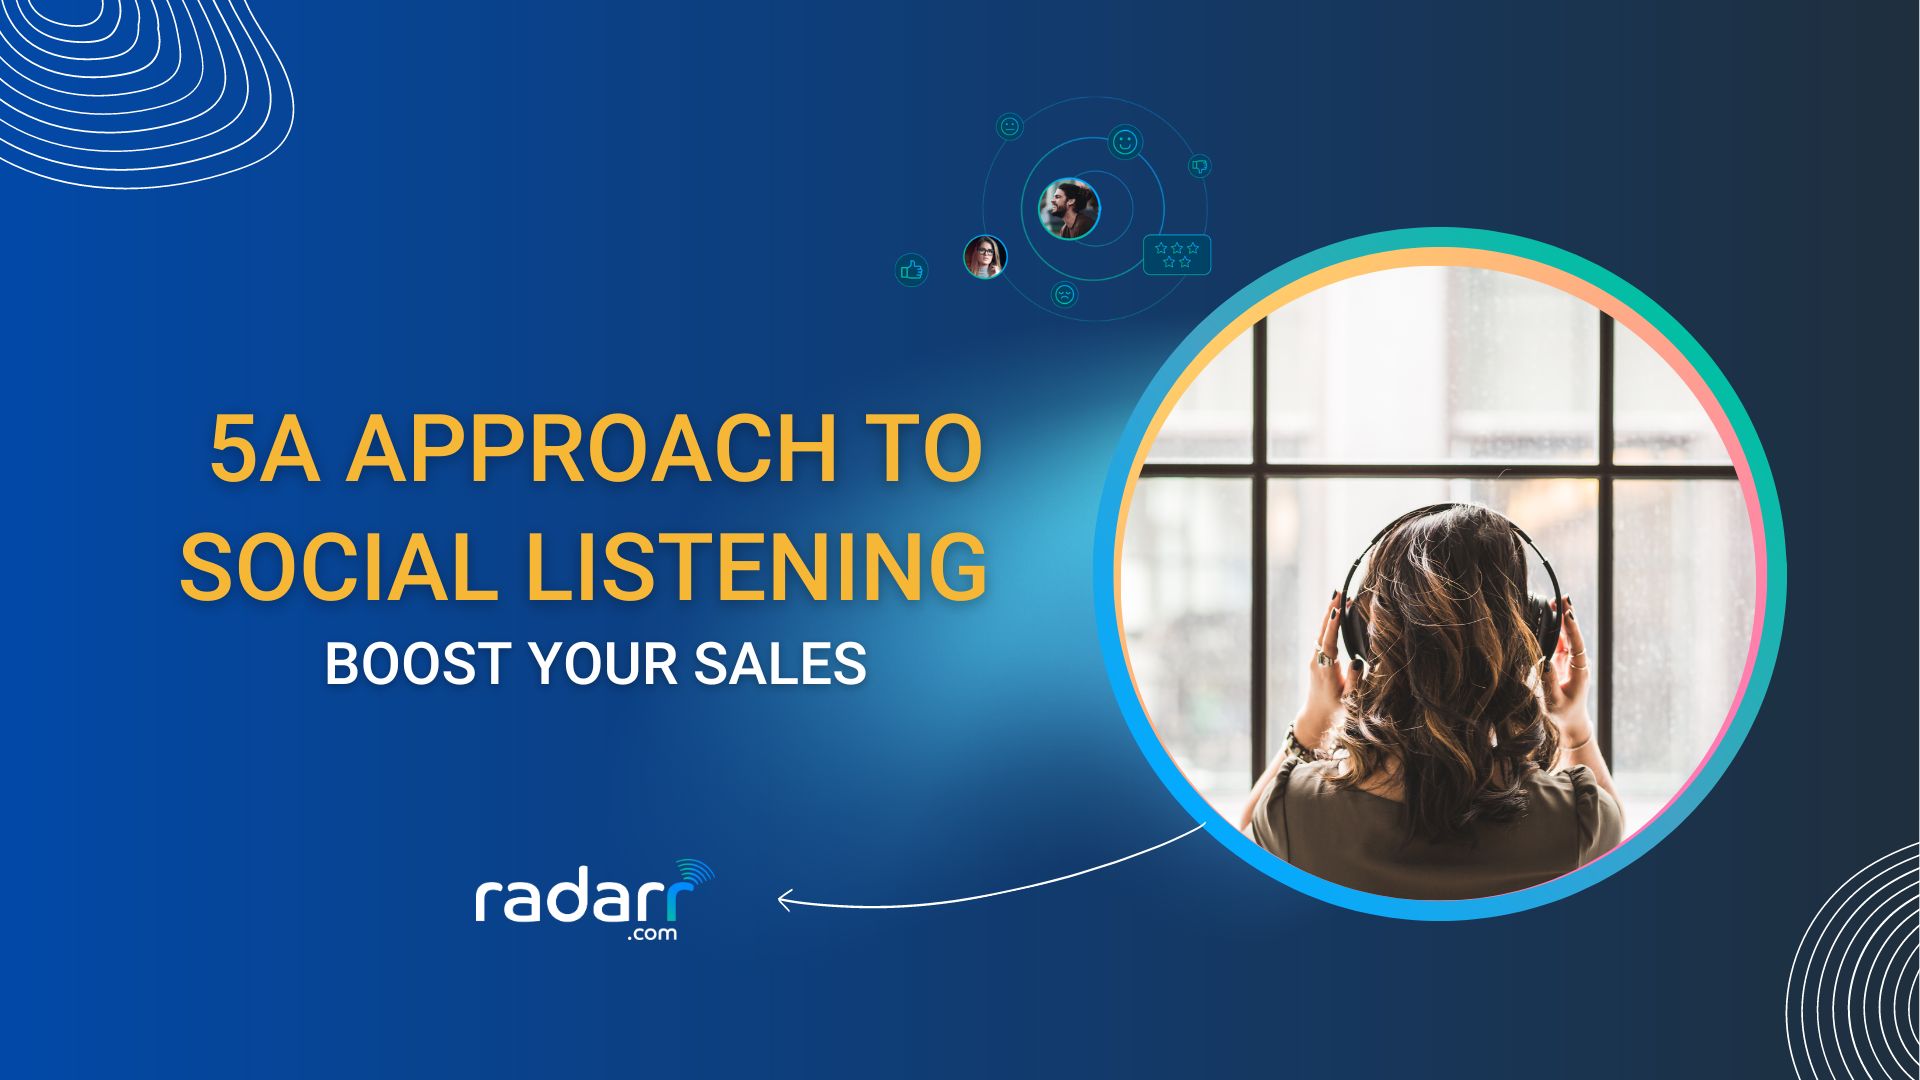 5A approach to social listening for business